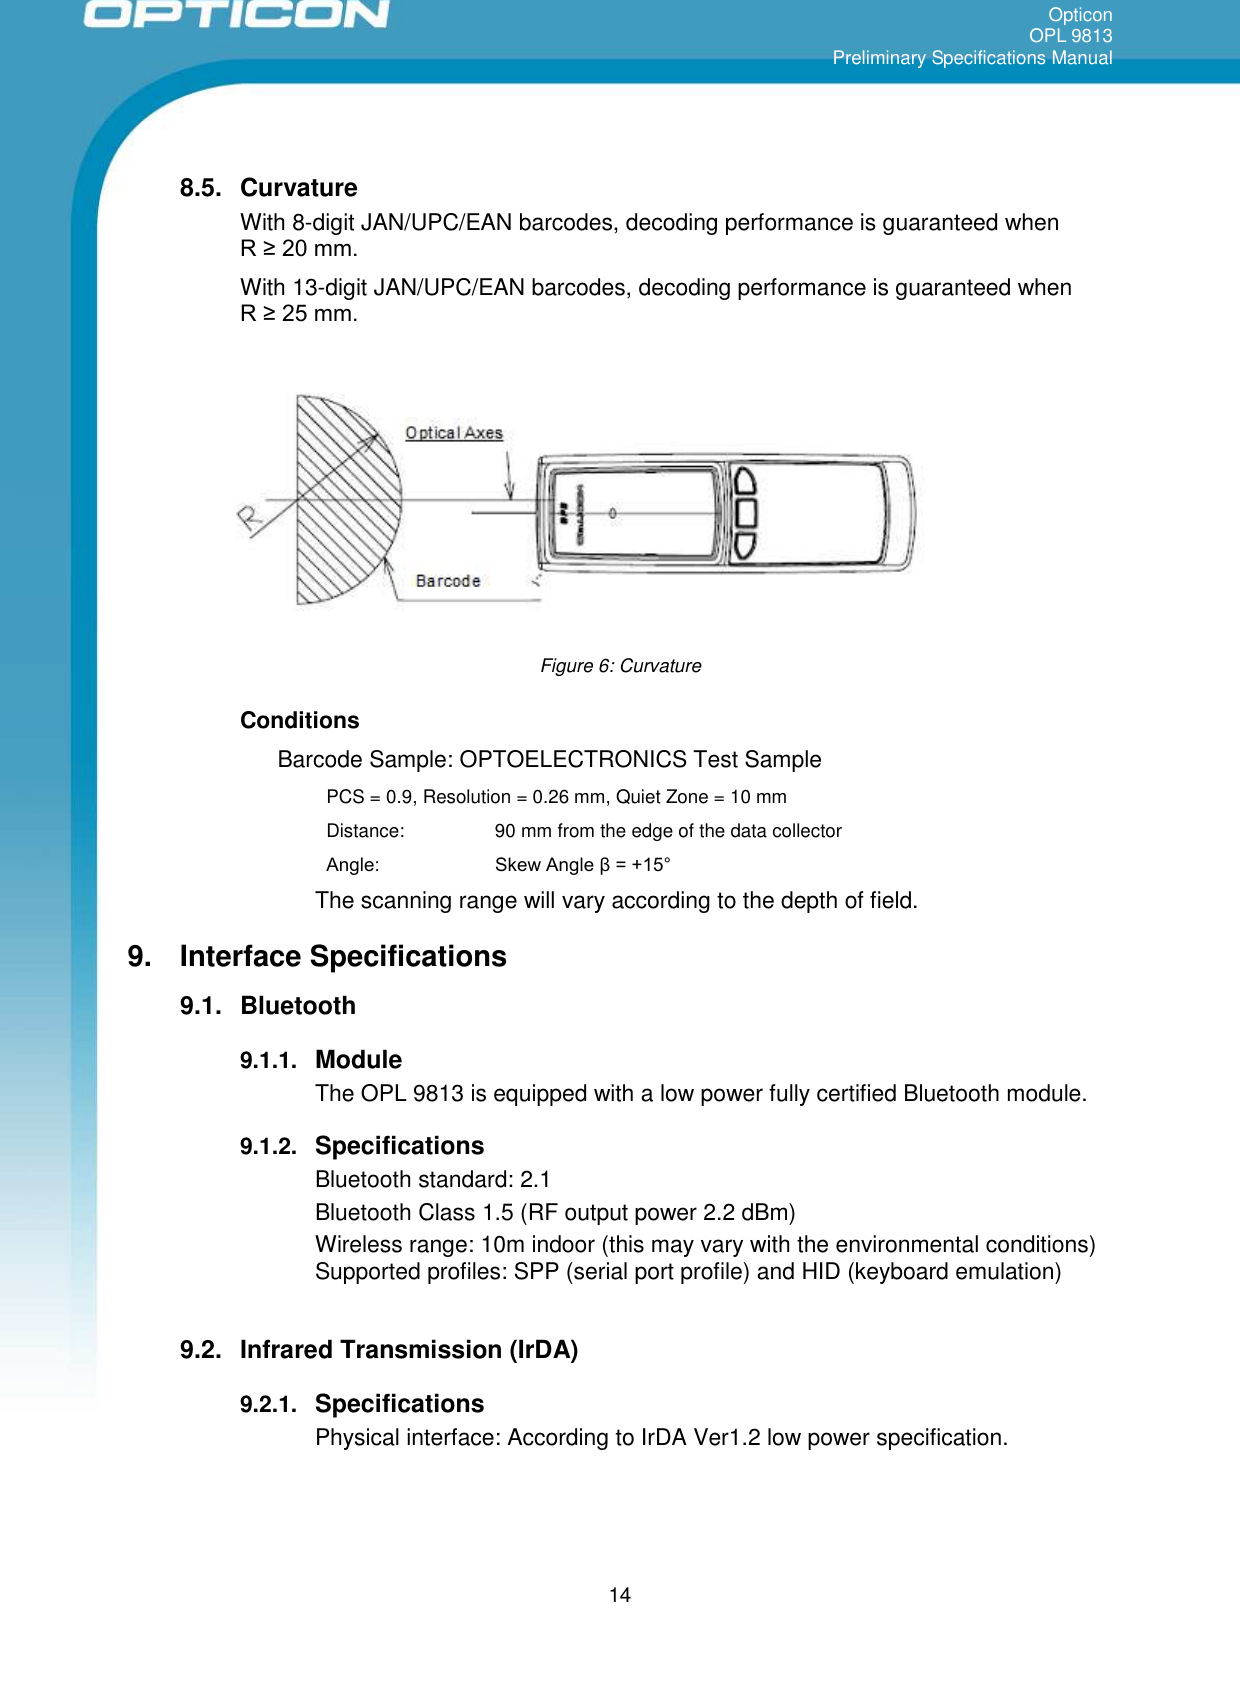 OpticonOPL 9813Preliminary Specifications Manual148.5. CurvatureWith 8-digit JAN/UPC/EAN barcodes, decoding performance is guaranteed whenR ≥ 20 mm. With 13-digit JAN/UPC/EAN barcodes, decoding performance is guaranteed whenR ≥ 25 mm. Figure 6: CurvatureConditionsBarcode Sample: OPTOELECTRONICS Test SamplePCS = 0.9, Resolution = 0.26 mm, Quiet Zone = 10 mmDistance: 90 mm from the edge of the data collectorAngle:  Skew Angle β = +15° The scanning range will vary according to the depth of field.9. Interface Specifications9.1. Bluetooth9.1.1. ModuleThe OPL 9813 is equipped with a low power fully certified Bluetooth module.9.1.2. SpecificationsBluetooth standard: 2.1Bluetooth Class 1.5 (RF output power 2.2 dBm)Wireless range: 10m indoor (this may vary with the environmental conditions)Supported profiles: SPP (serial port profile) and HID (keyboard emulation)9.2. Infrared Transmission (IrDA)9.2.1. SpecificationsPhysical interface: According to IrDA Ver1.2 low power specification.